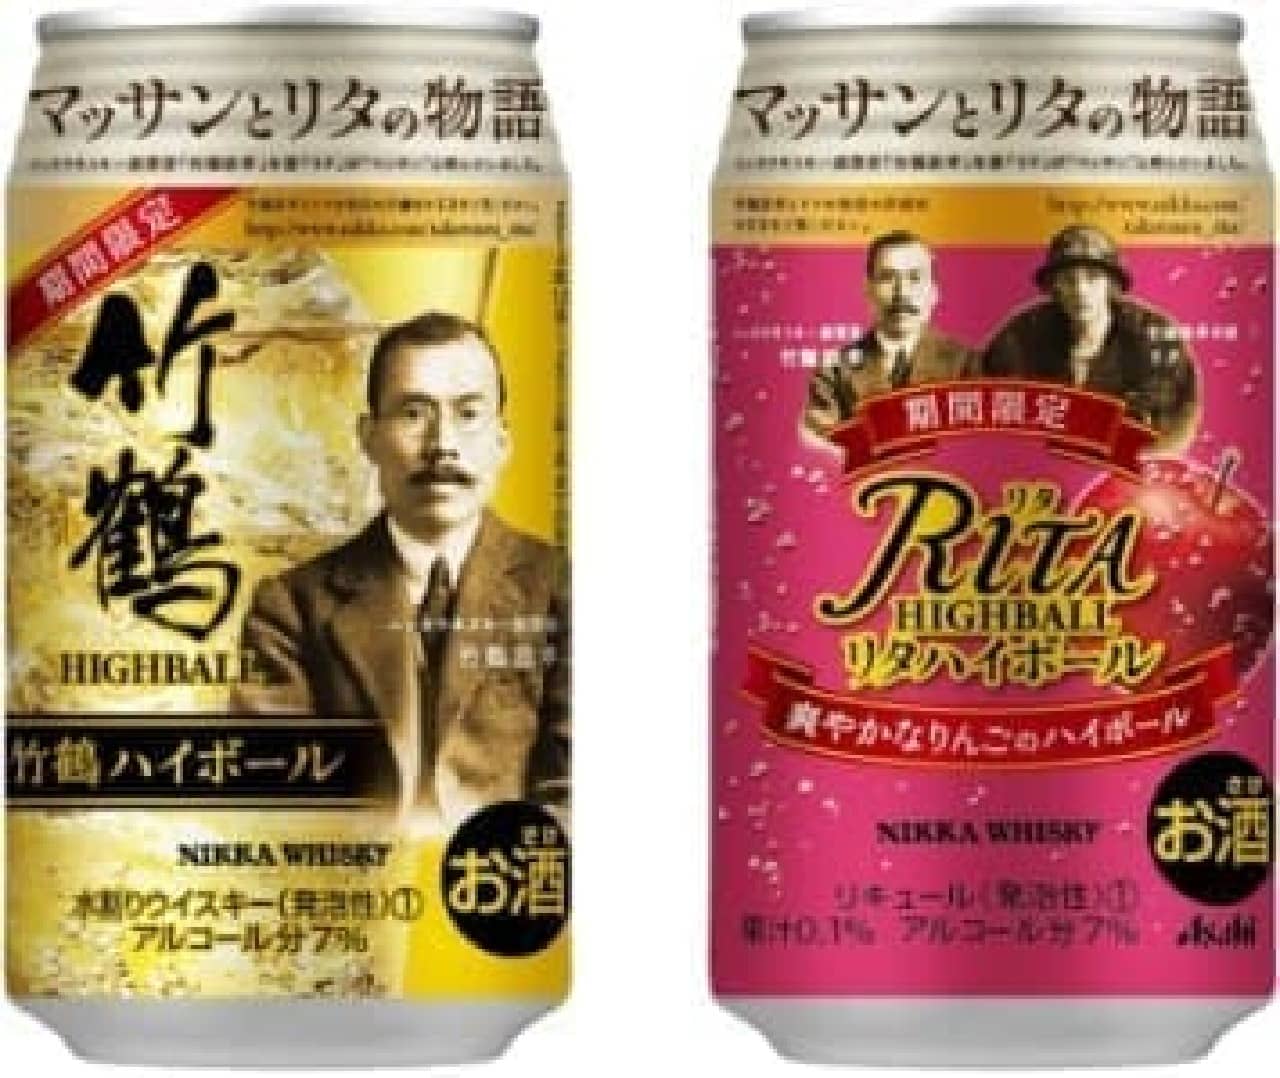 The canned highball tells the story of Massan and Rita